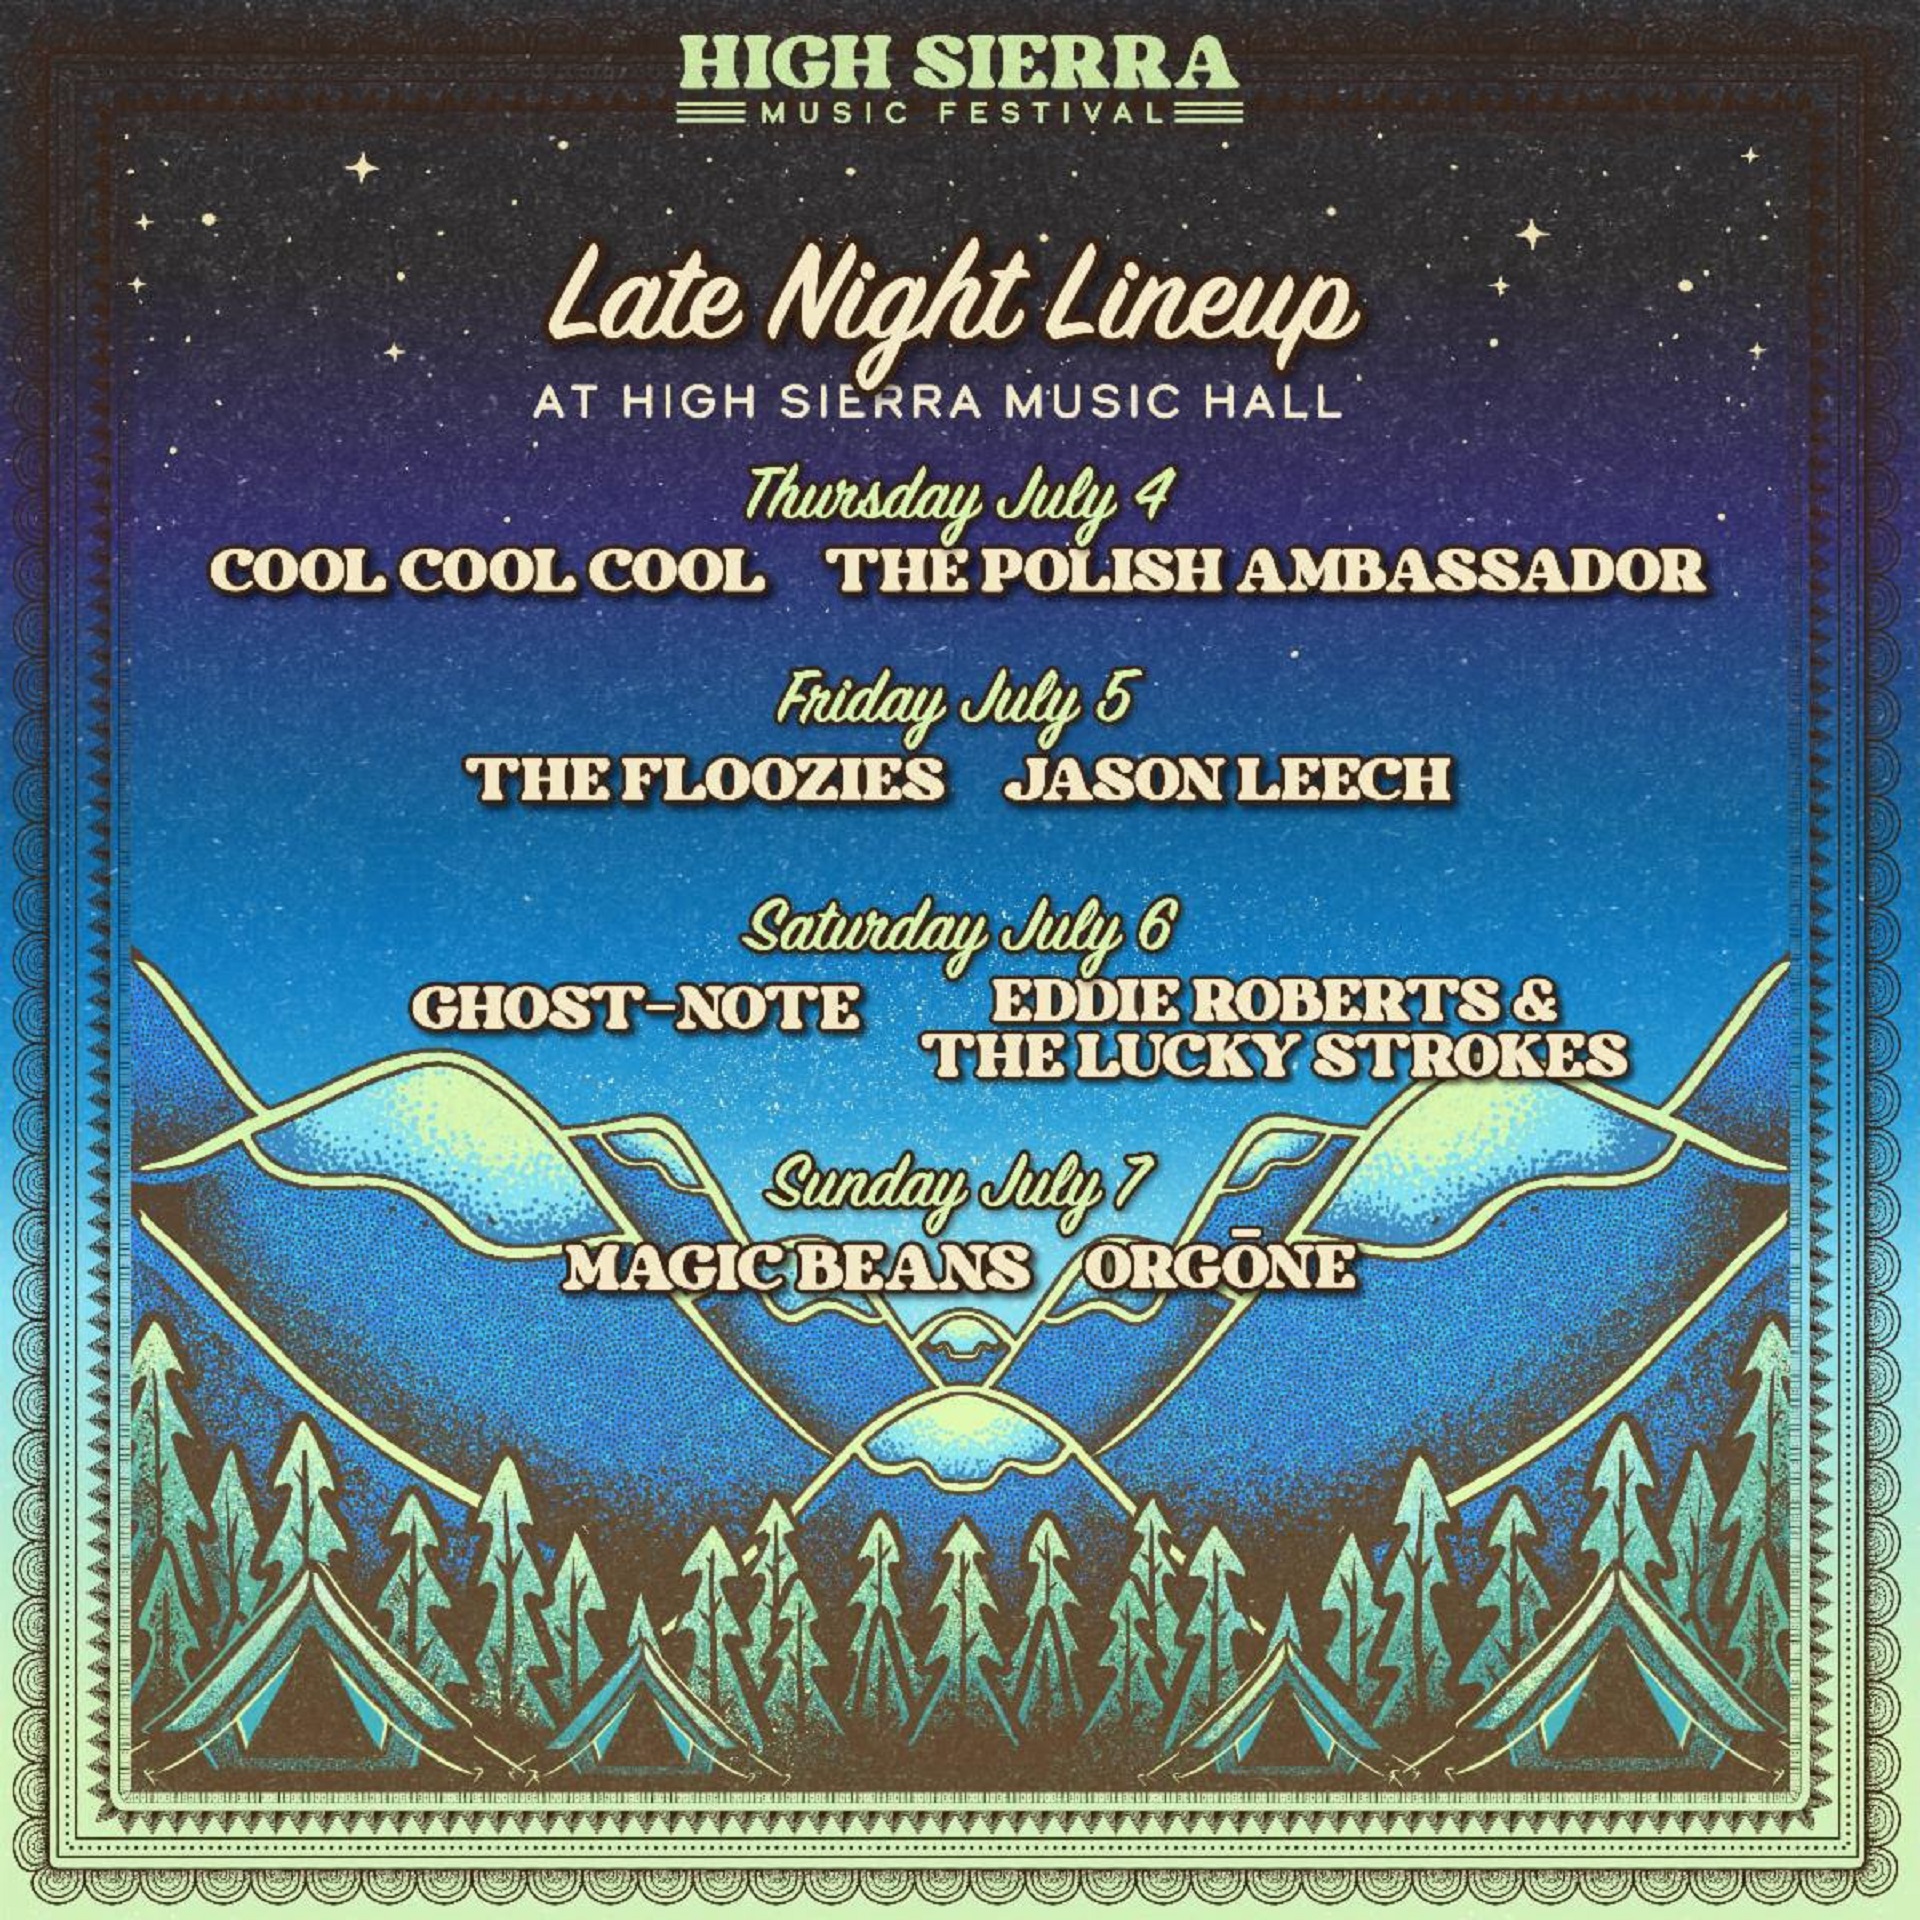 High Sierra Music Festival Announces Late Night Programming And Welcomes Orgōne to the Lineup